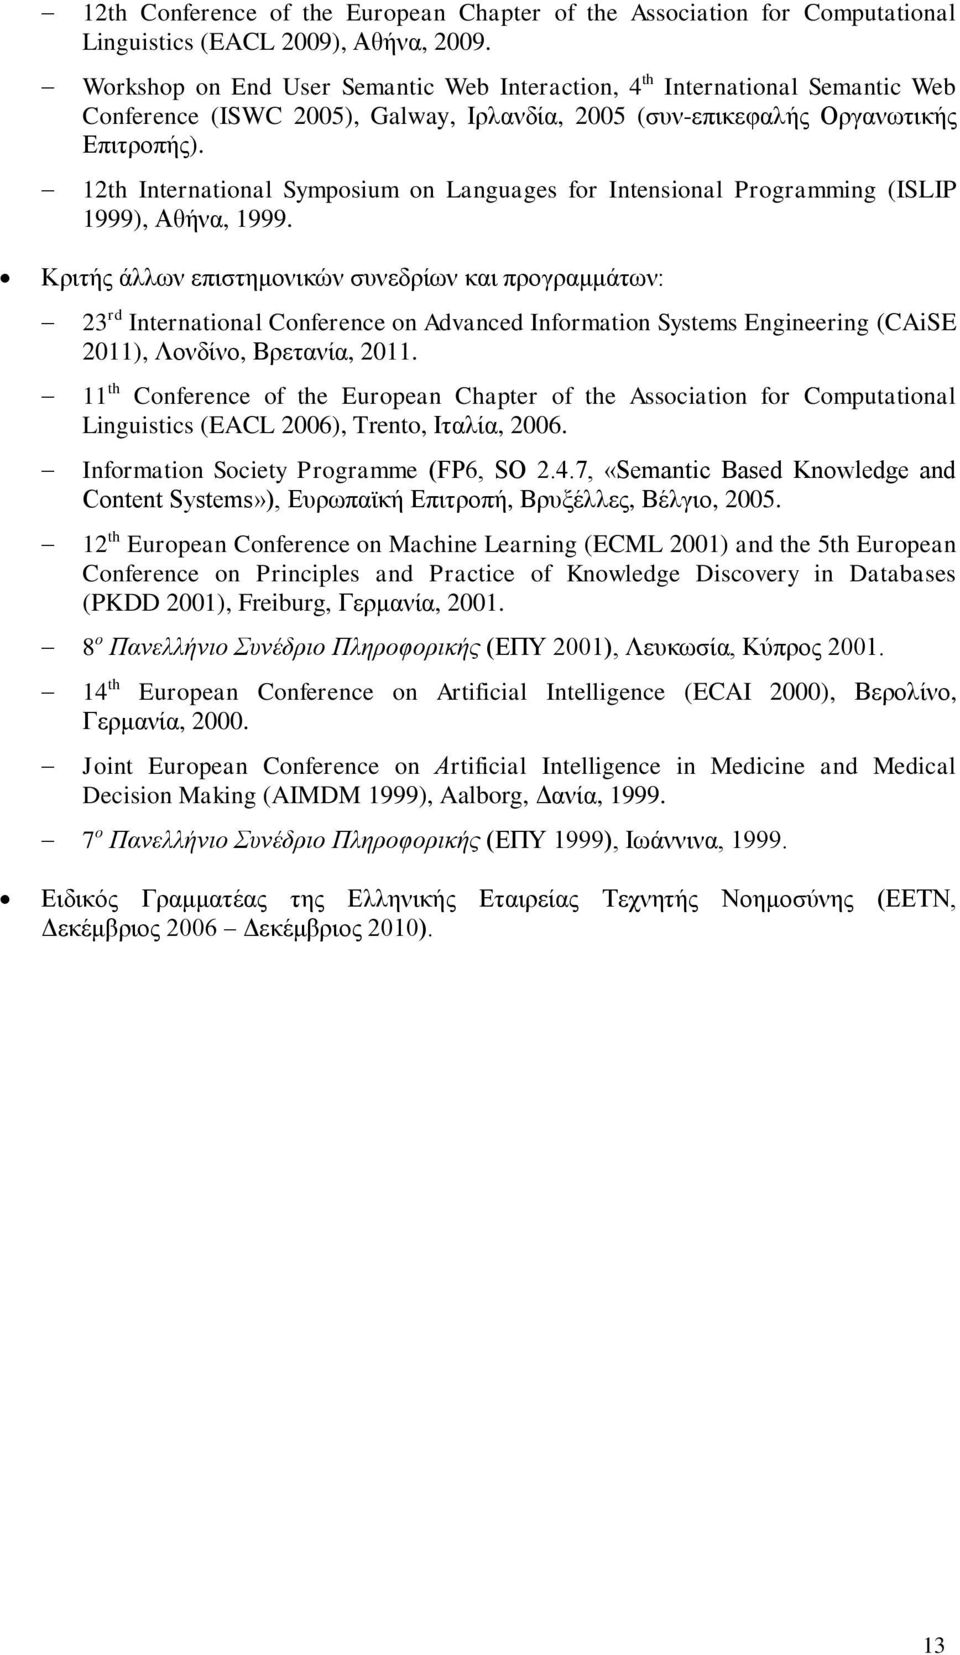 12th International Symposium on Languages for Intensional Programming (ISLIP 1999), Αθήνα, 1999.